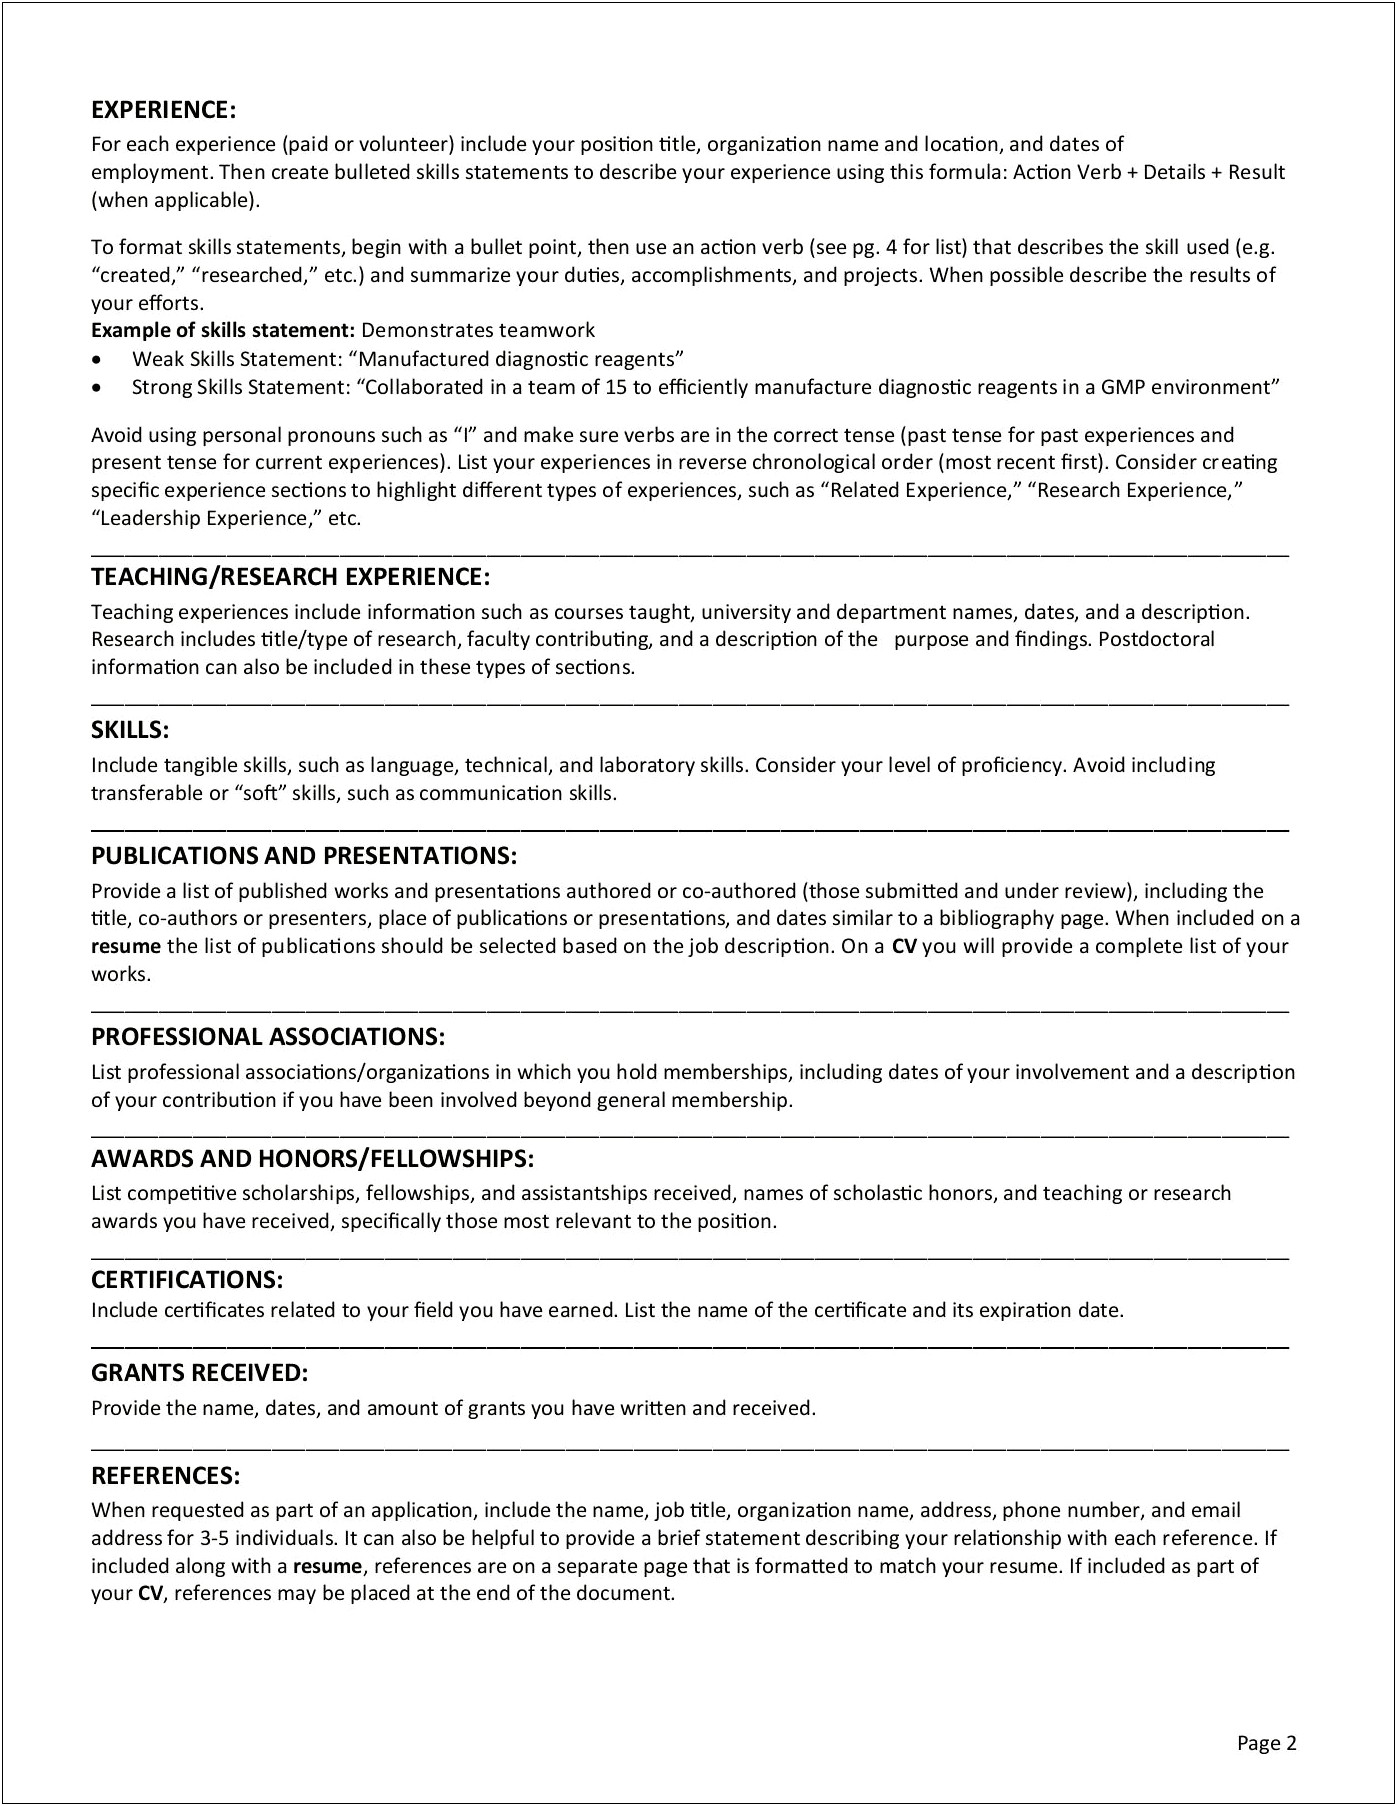 Where To Put Author Credit In Resume